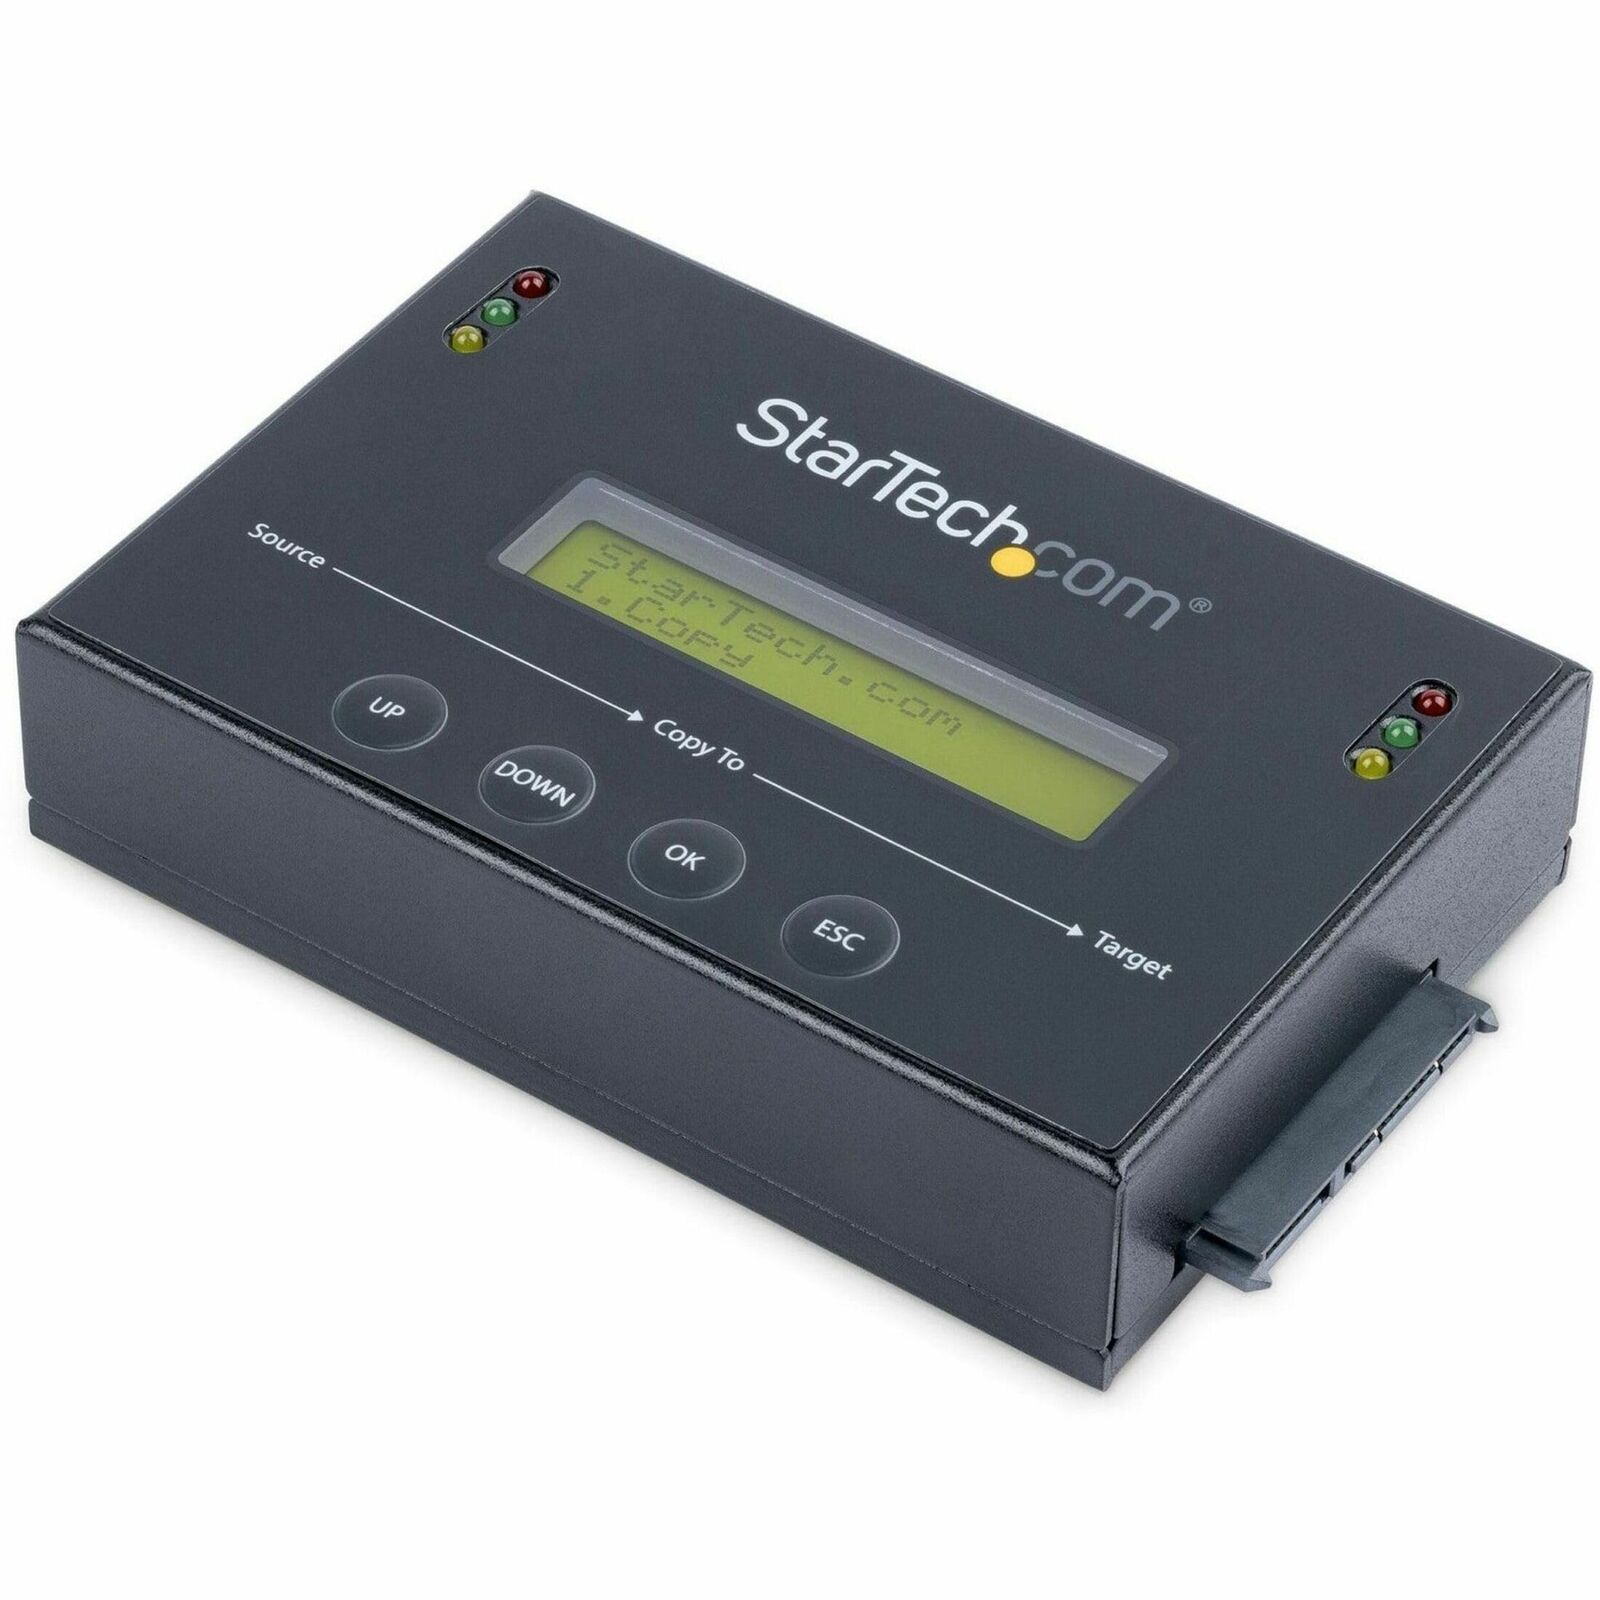 StarTech.com 1:1 Standalone Hard Drive Duplicator with Disk Image Manager For Ba